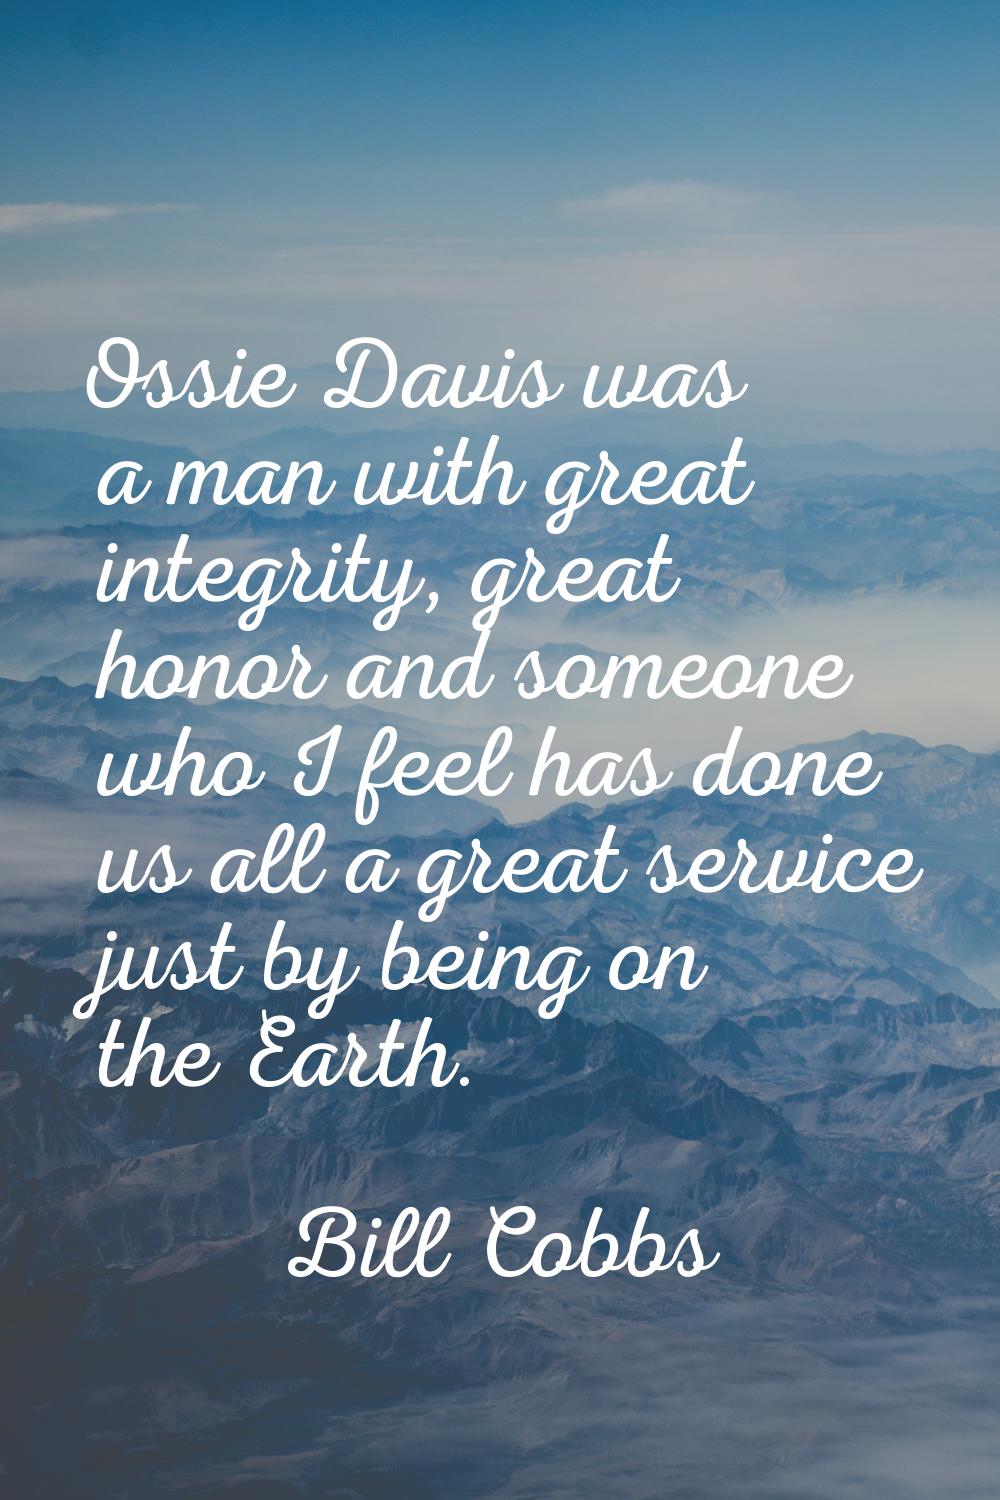 Ossie Davis was a man with great integrity, great honor and someone who I feel has done us all a gr